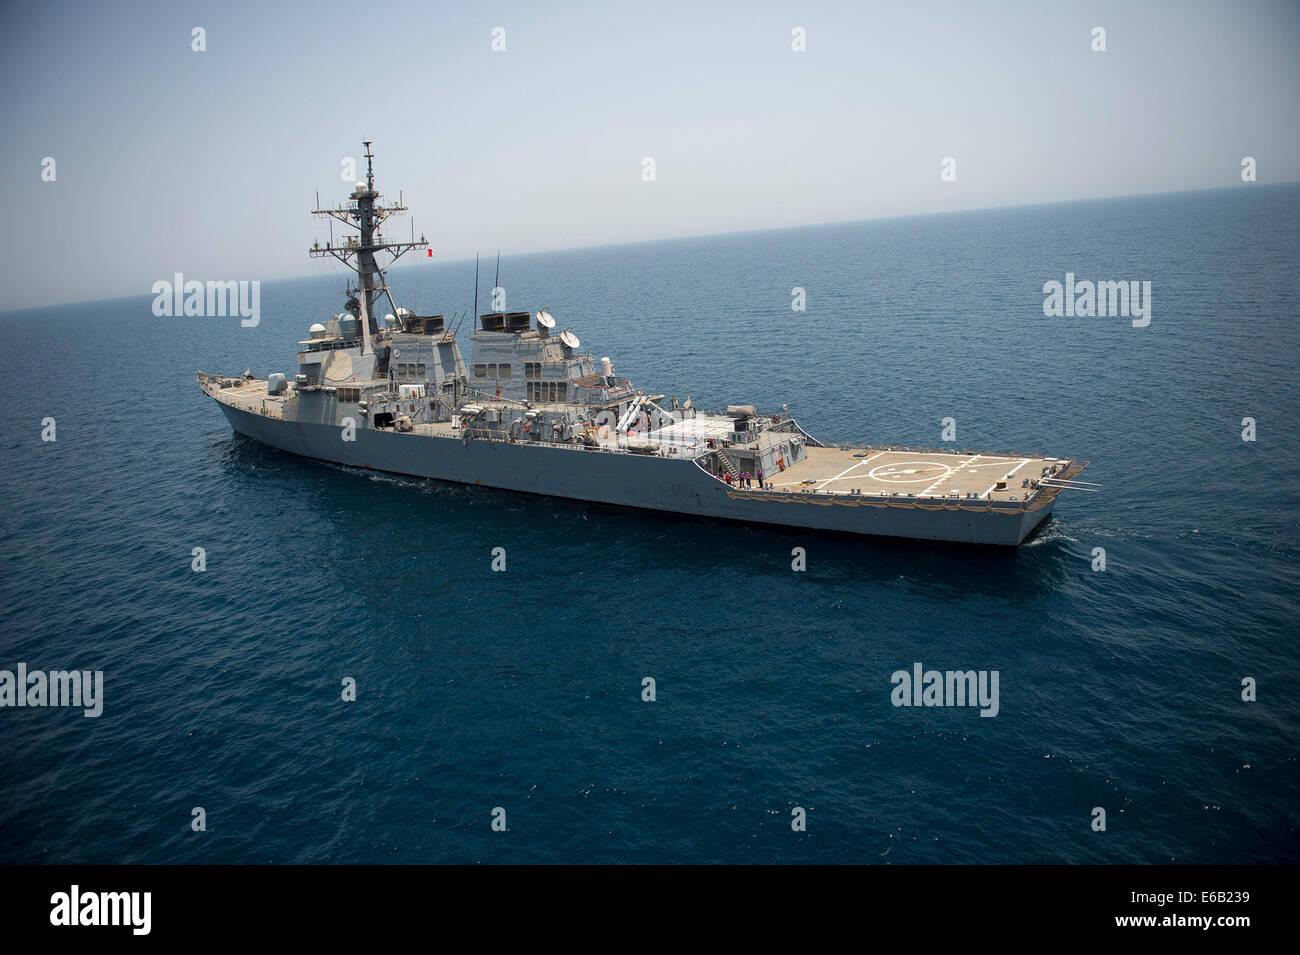 The guided missile destroyer USS Arleigh Burke (DDG 51) transits the Persian Gulf Aug. 2, 2014. The Arleigh Burke was deployed in the U.S. 5th Fleet area of responsibility supporting maritime security operations and theater security cooperation efforts. Stock Photo